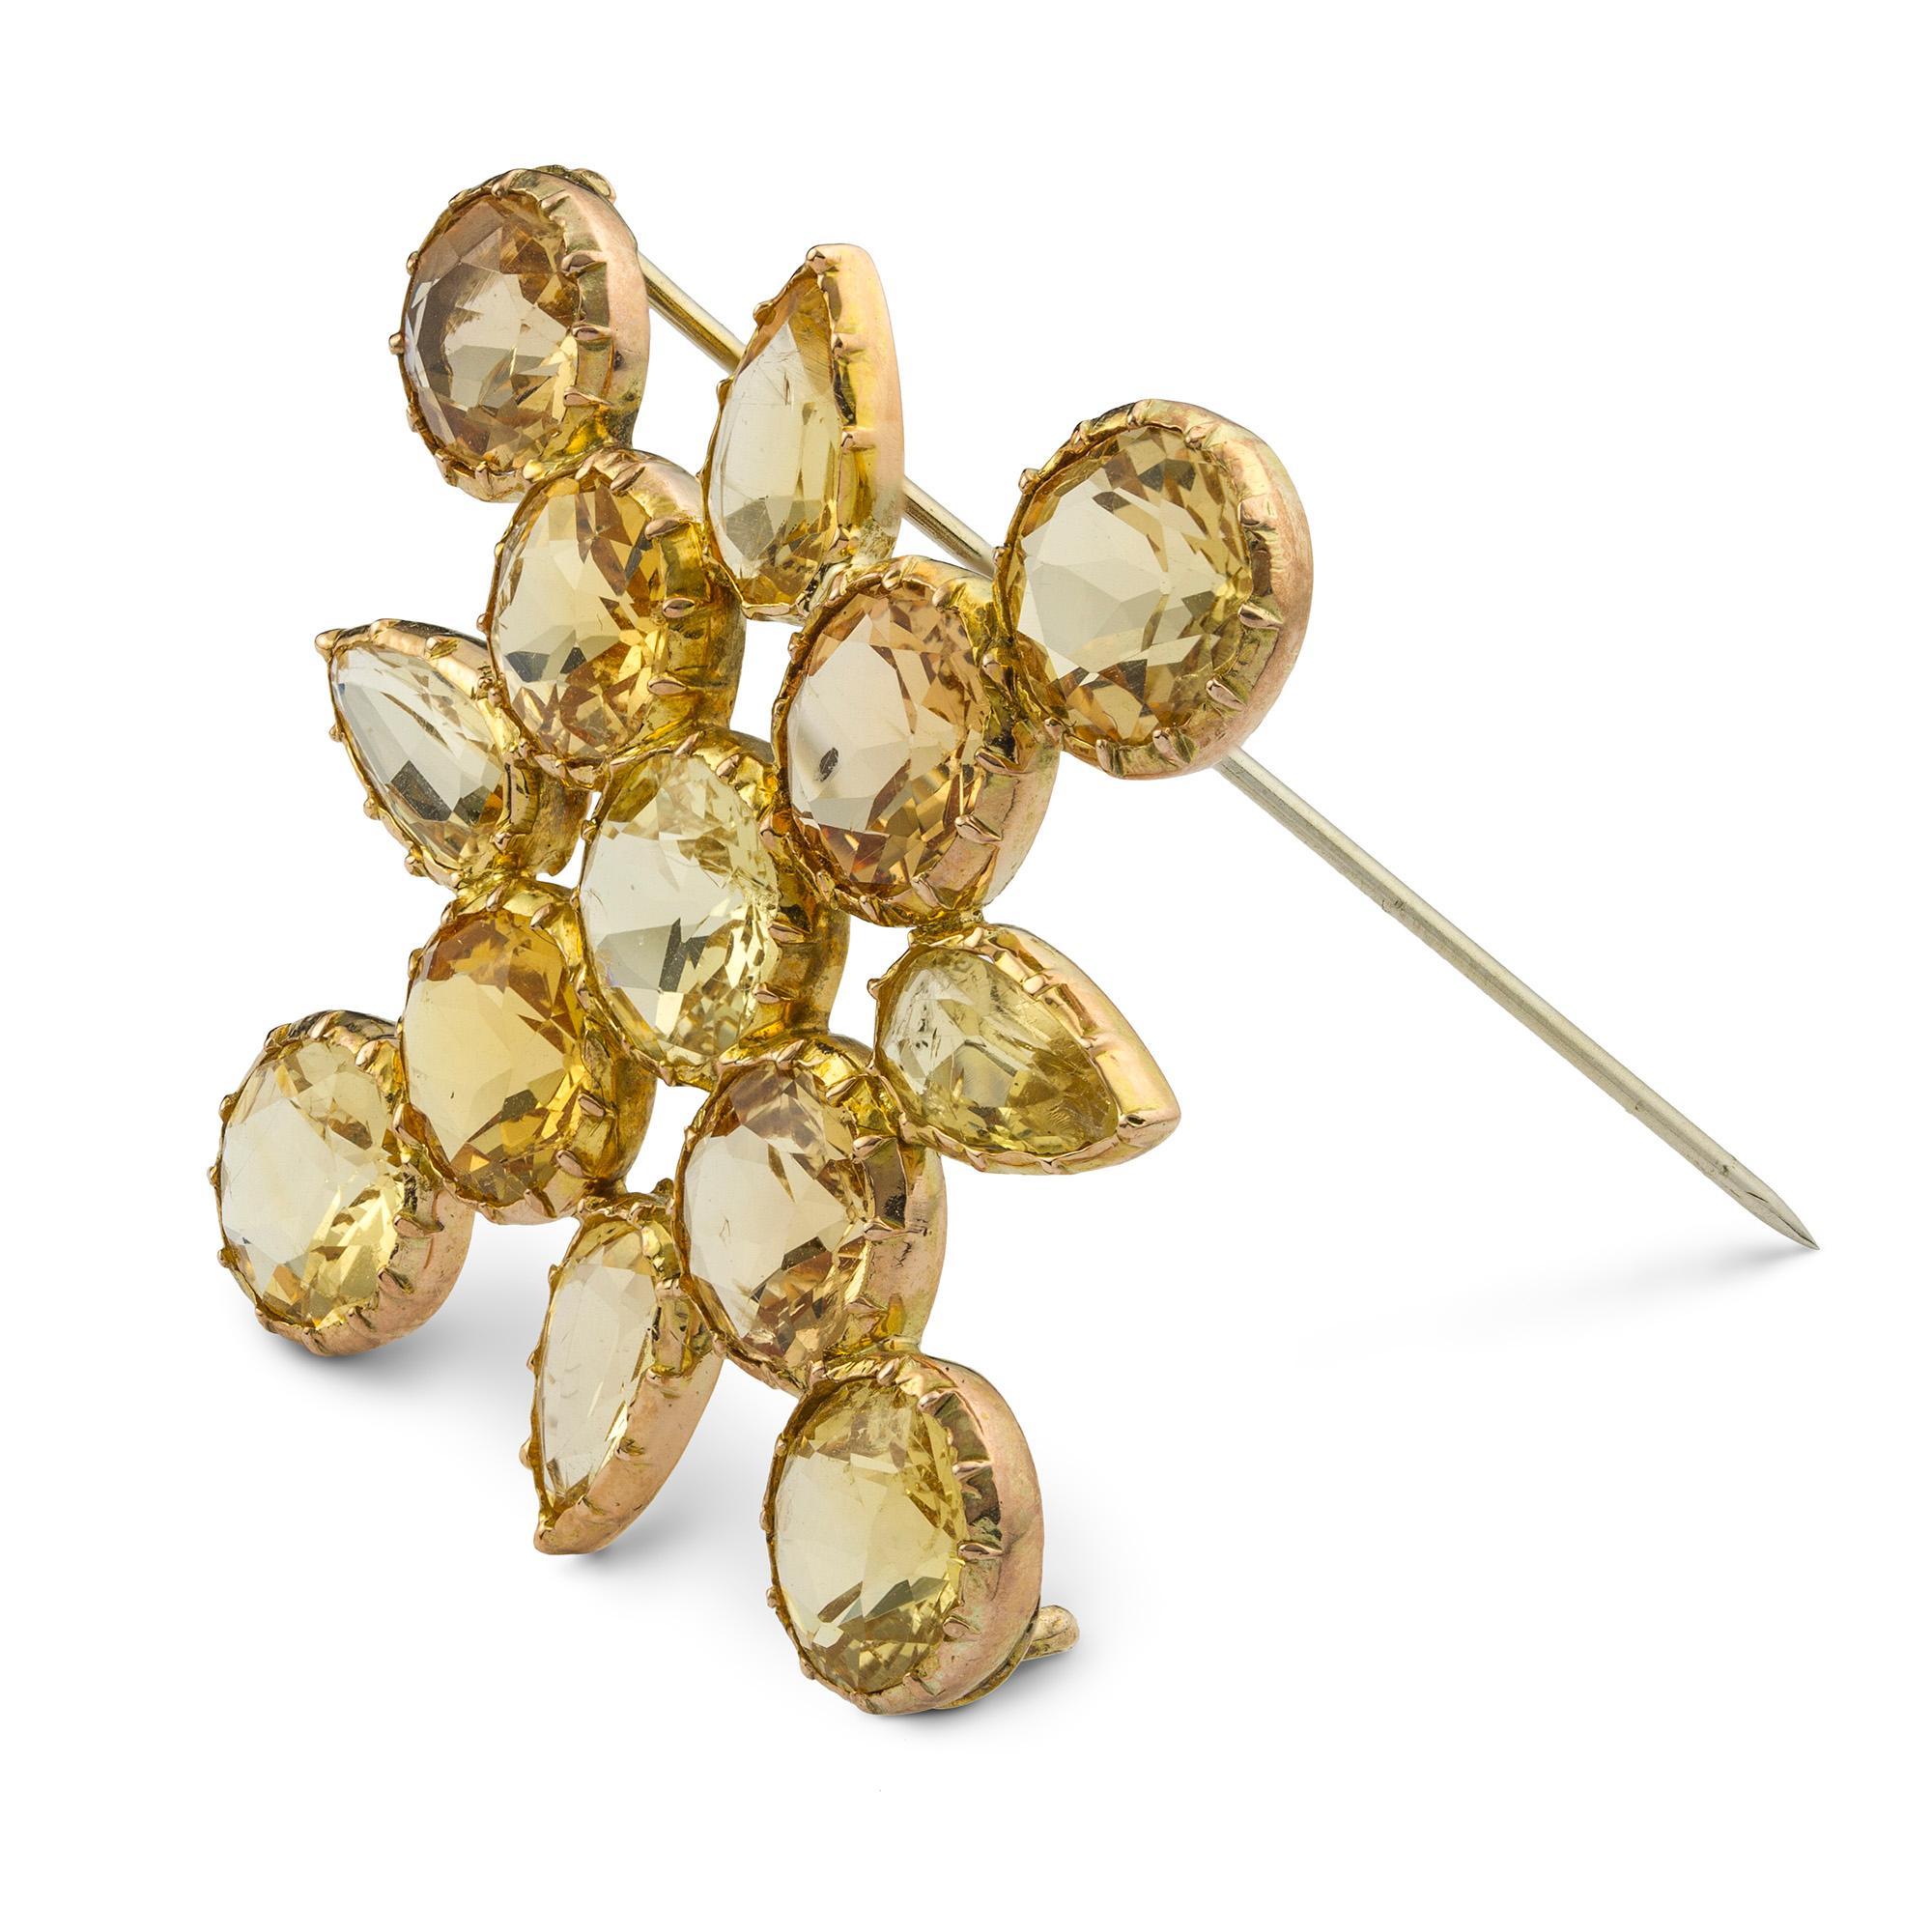 An early Victorian topaz set cross brooch, the brooch in the form of a cross with nine round faceted topazes and pear shape faceted topazes in between the topazes, estimated to weigh total of 23.5 carats, all cut down set to a gold mount with a